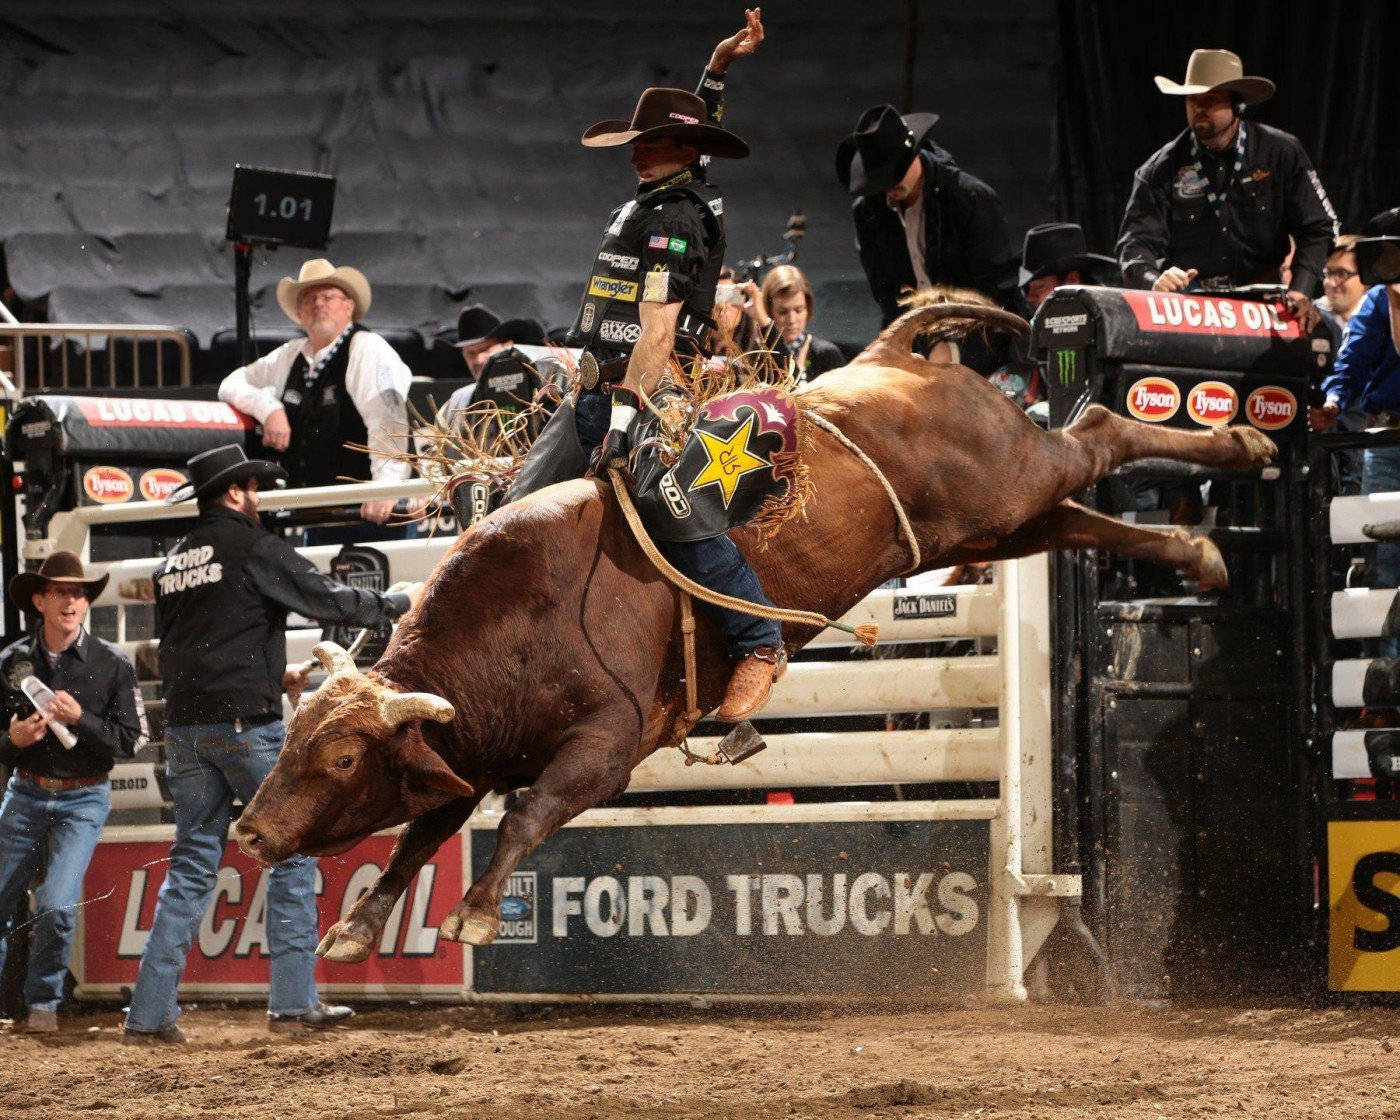 Intense Bull Riding Rodeo Background